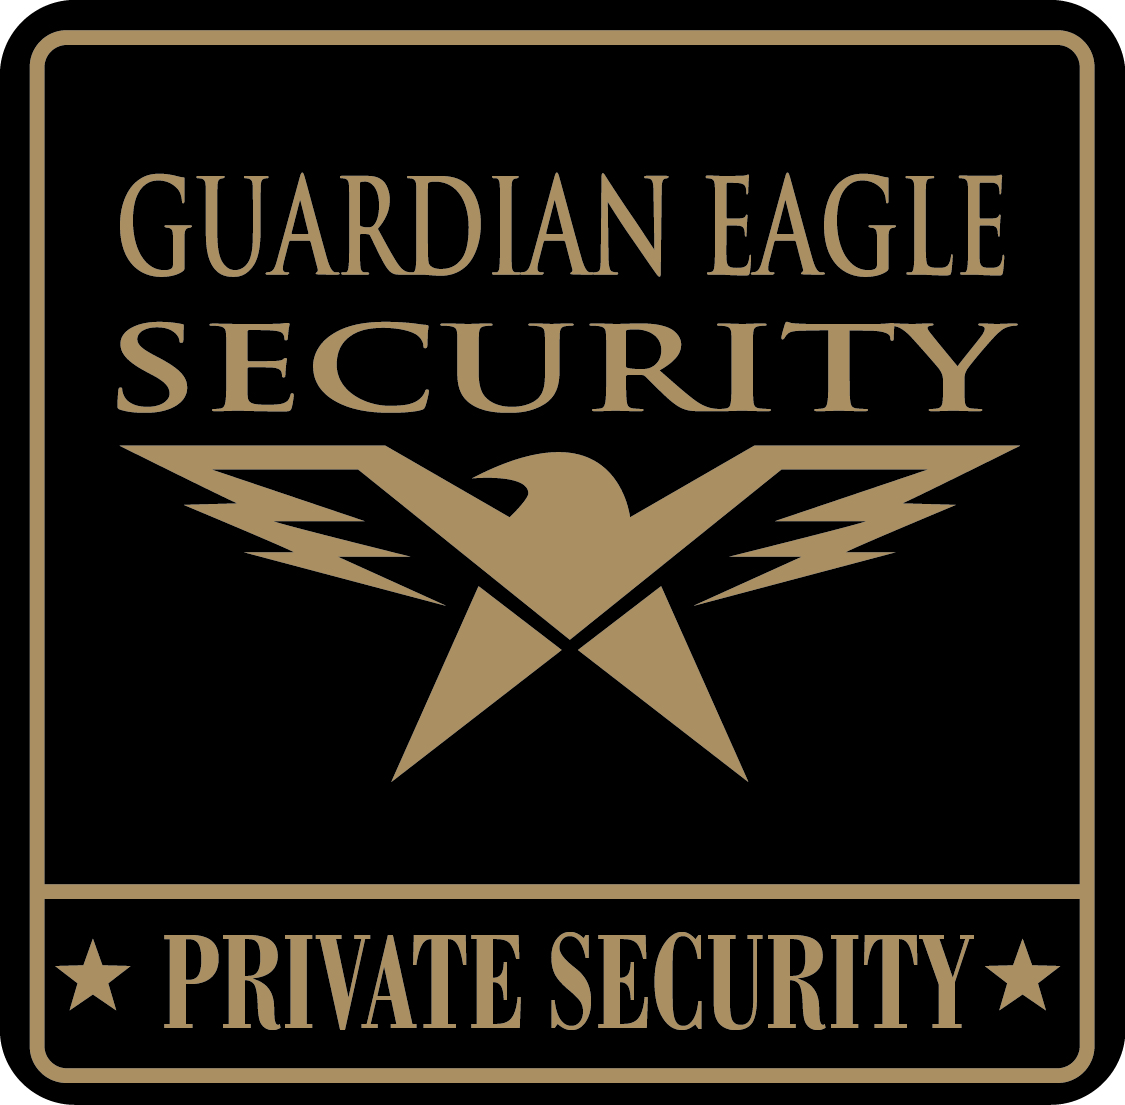 GUARDIAN EAGLE
SECURITY

Ie

* PRIVATE SECURITY *
W J),